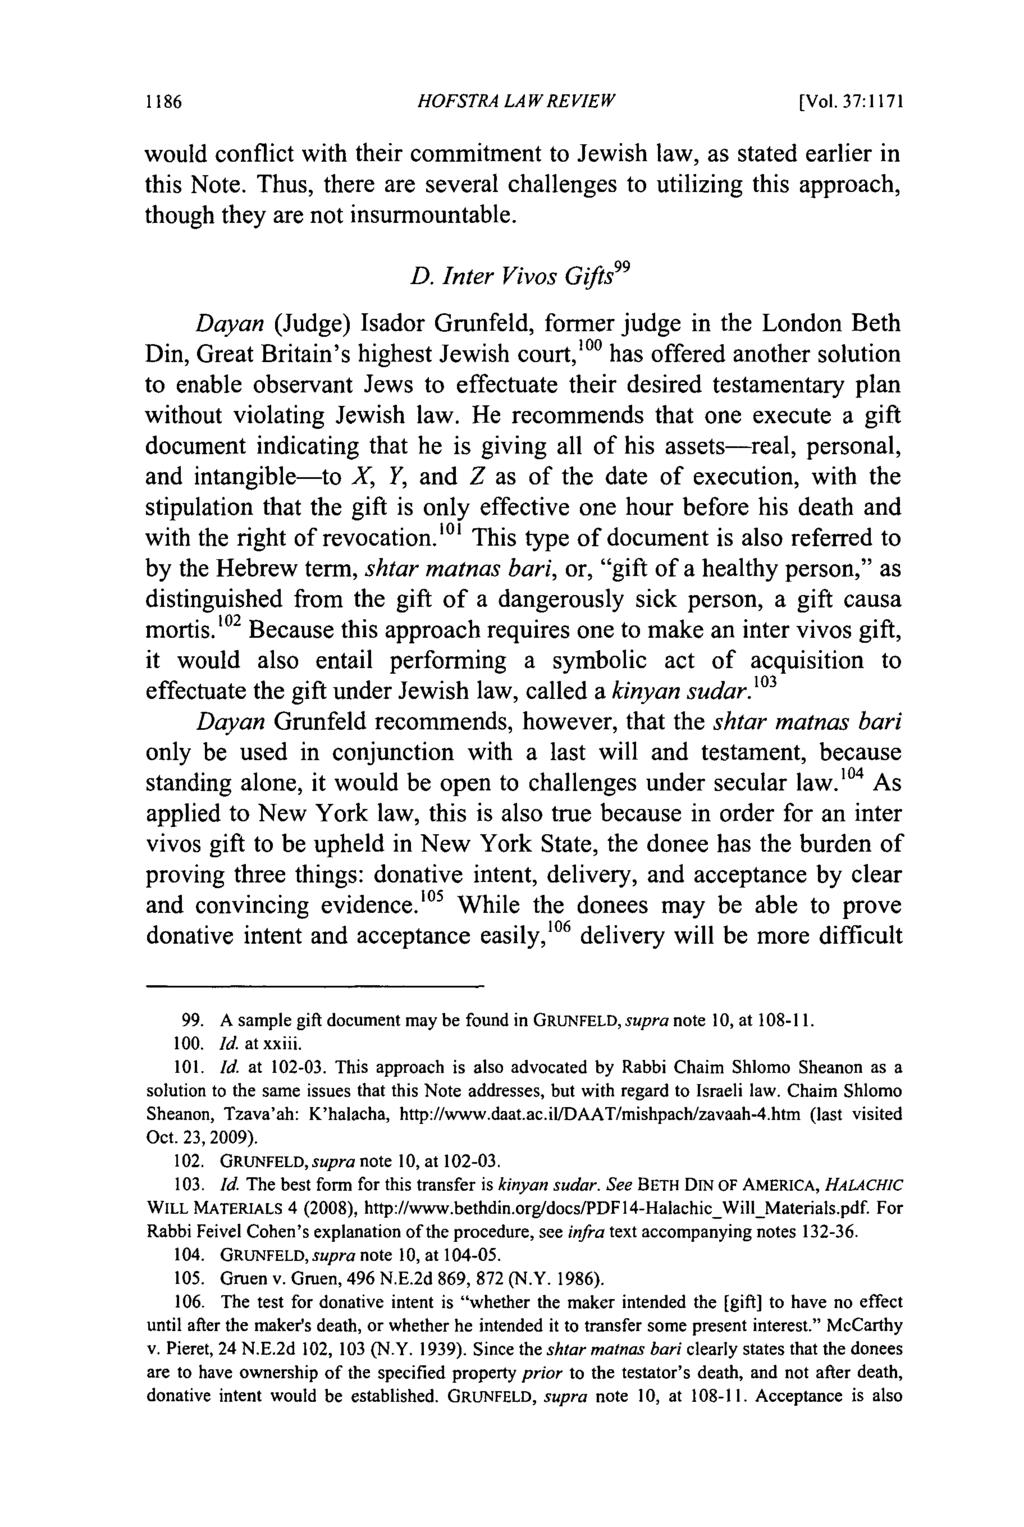 Hofstra Law Review, Vol. 37, Iss. 4 [2009], Art. 11 HOFSTRA LAW REVIEW [Vol. 37:1171 would conflict with their commitment to Jewish law, as stated earlier in this Note.